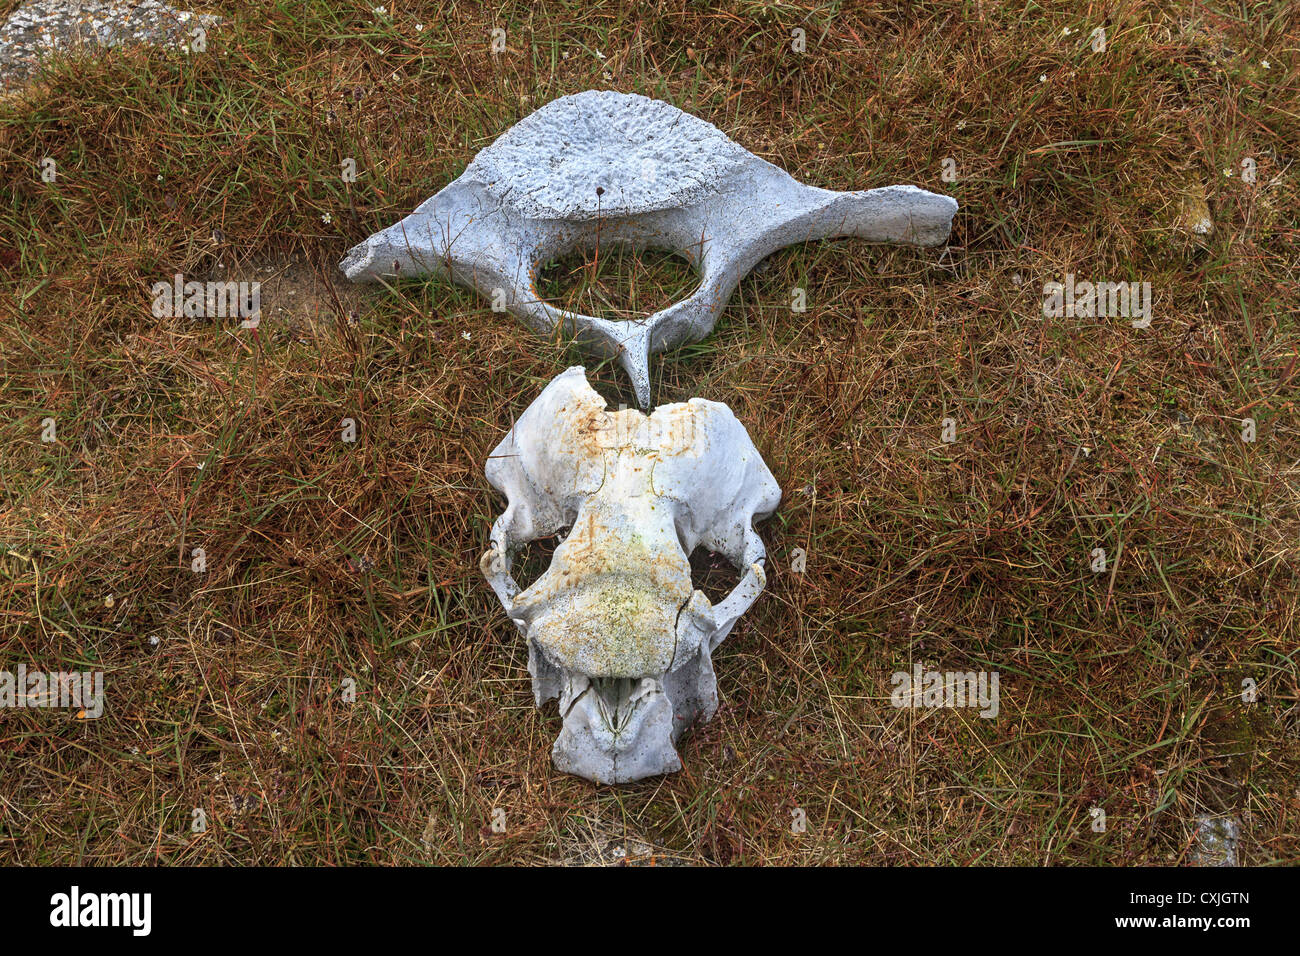 skull and vertebrae of walrus on tundra ground in Canadian high arctic. Stock Photo